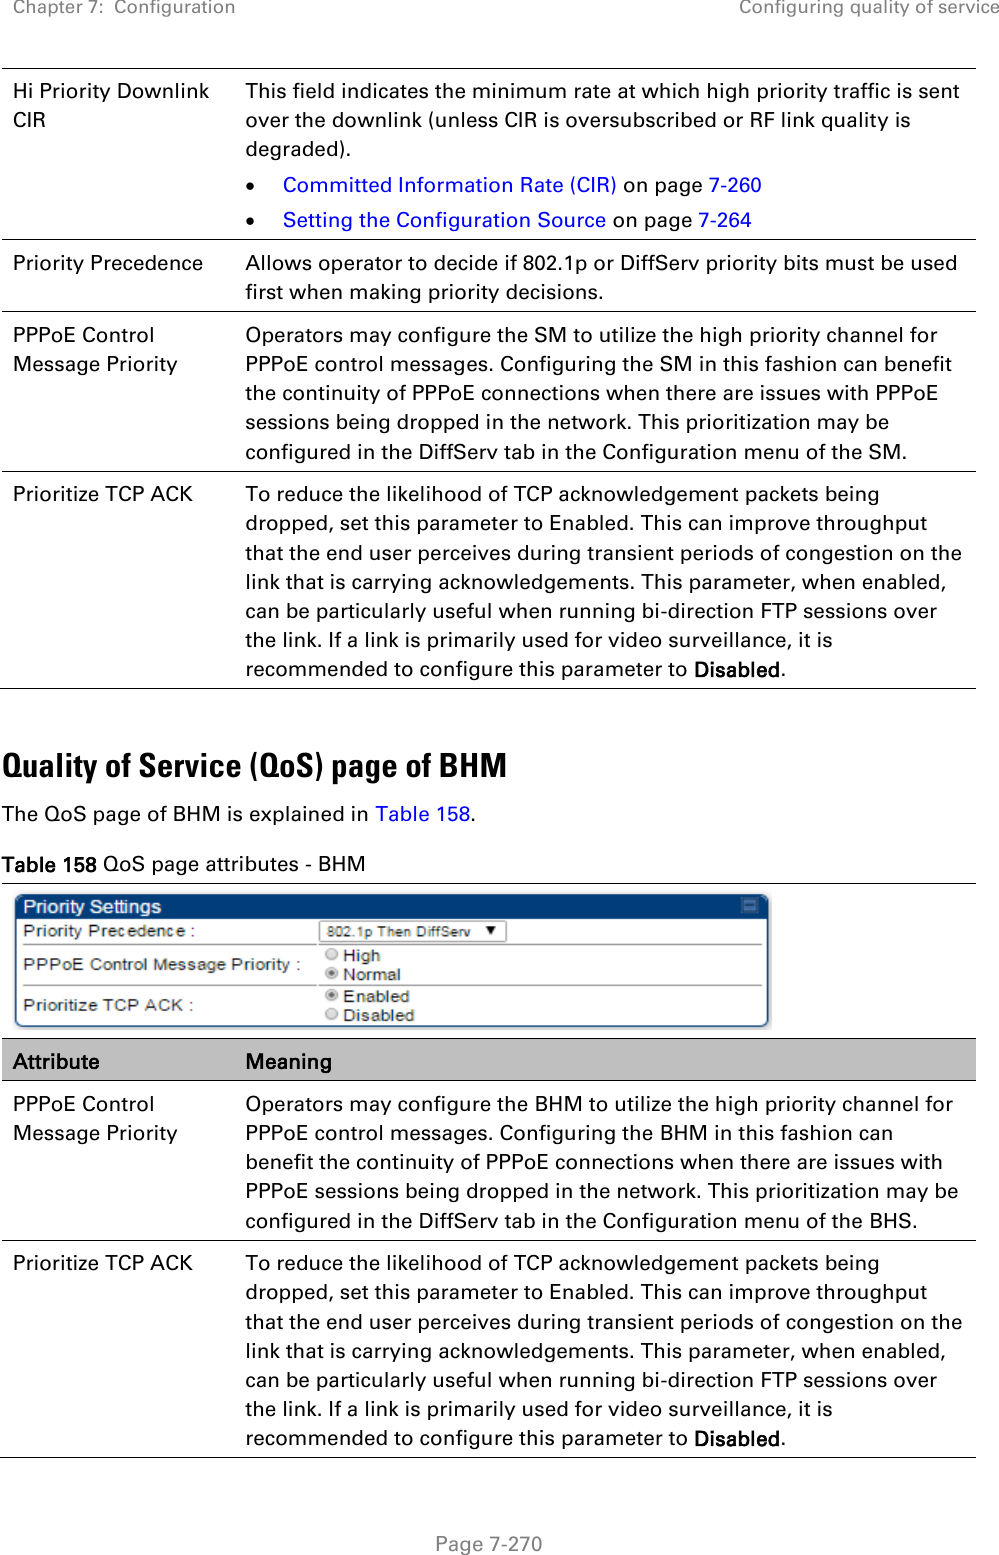 Chapter 7:  Configuration Configuring quality of service   Page 7-270 Hi Priority Downlink CIR This field indicates the minimum rate at which high priority traffic is sent over the downlink (unless CIR is oversubscribed or RF link quality is degraded).  Committed Information Rate (CIR) on page 7-260  Setting the Configuration Source on page 7-264 Priority Precedence Allows operator to decide if 802.1p or DiffServ priority bits must be used first when making priority decisions. PPPoE Control Message Priority Operators may configure the SM to utilize the high priority channel for PPPoE control messages. Configuring the SM in this fashion can benefit the continuity of PPPoE connections when there are issues with PPPoE sessions being dropped in the network. This prioritization may be configured in the DiffServ tab in the Configuration menu of the SM. Prioritize TCP ACK To reduce the likelihood of TCP acknowledgement packets being dropped, set this parameter to Enabled. This can improve throughput that the end user perceives during transient periods of congestion on the link that is carrying acknowledgements. This parameter, when enabled, can be particularly useful when running bi-direction FTP sessions over the link. If a link is primarily used for video surveillance, it is recommended to configure this parameter to Disabled.  Quality of Service (QoS) page of BHM The QoS page of BHM is explained in Table 158. Table 158 QoS page attributes - BHM  Attribute Meaning PPPoE Control Message Priority Operators may configure the BHM to utilize the high priority channel for PPPoE control messages. Configuring the BHM in this fashion can benefit the continuity of PPPoE connections when there are issues with PPPoE sessions being dropped in the network. This prioritization may be configured in the DiffServ tab in the Configuration menu of the BHS. Prioritize TCP ACK To reduce the likelihood of TCP acknowledgement packets being dropped, set this parameter to Enabled. This can improve throughput that the end user perceives during transient periods of congestion on the link that is carrying acknowledgements. This parameter, when enabled, can be particularly useful when running bi-direction FTP sessions over the link. If a link is primarily used for video surveillance, it is recommended to configure this parameter to Disabled. 